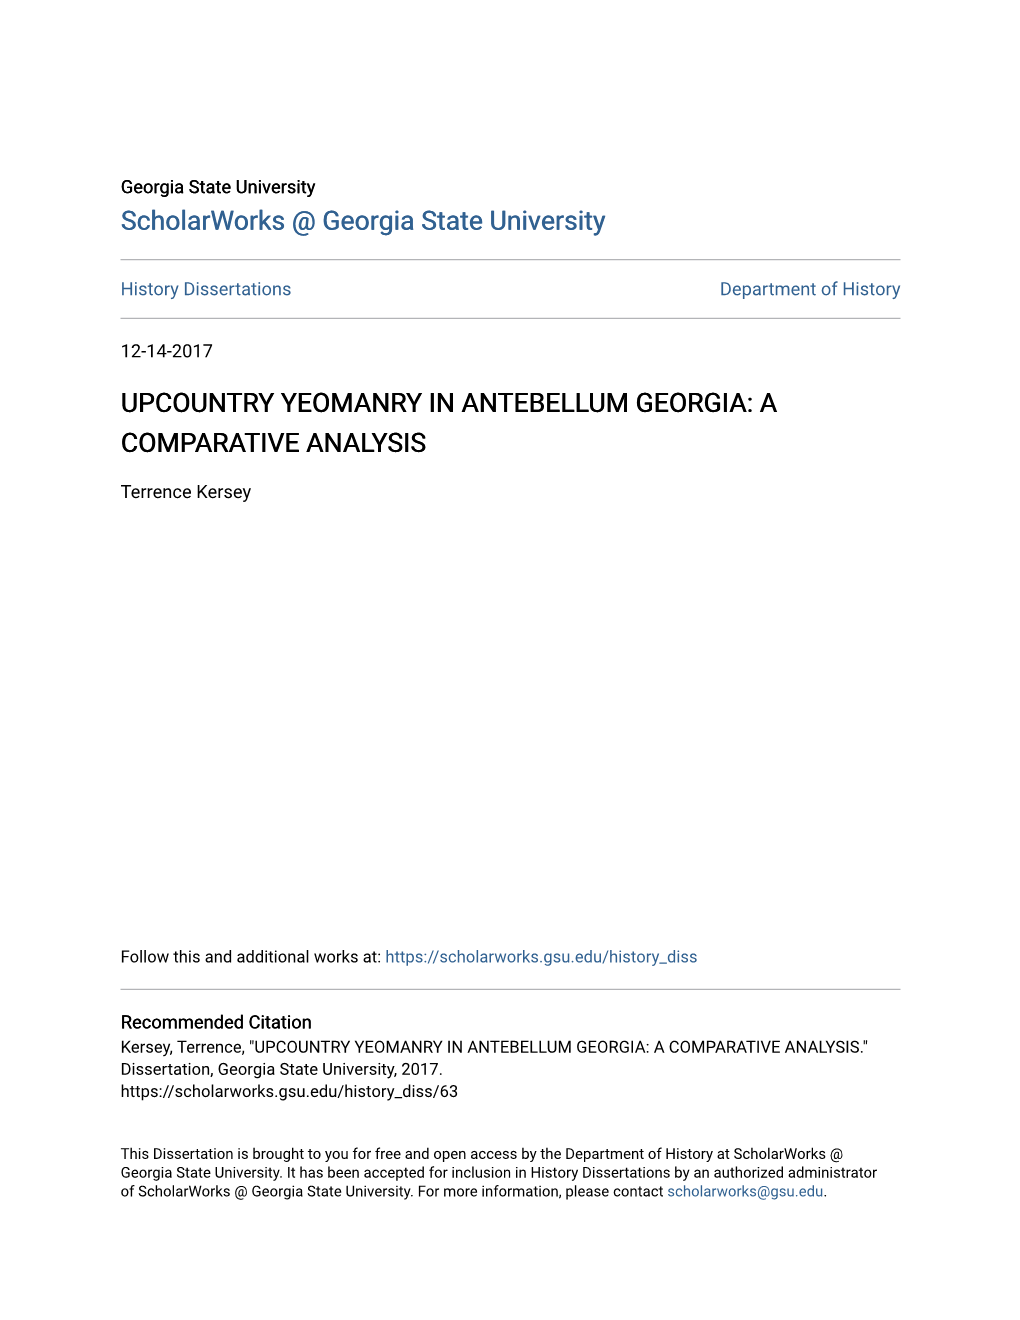 Upcountry Yeomanry in Antebellum Georgia: a Comparative Analysis